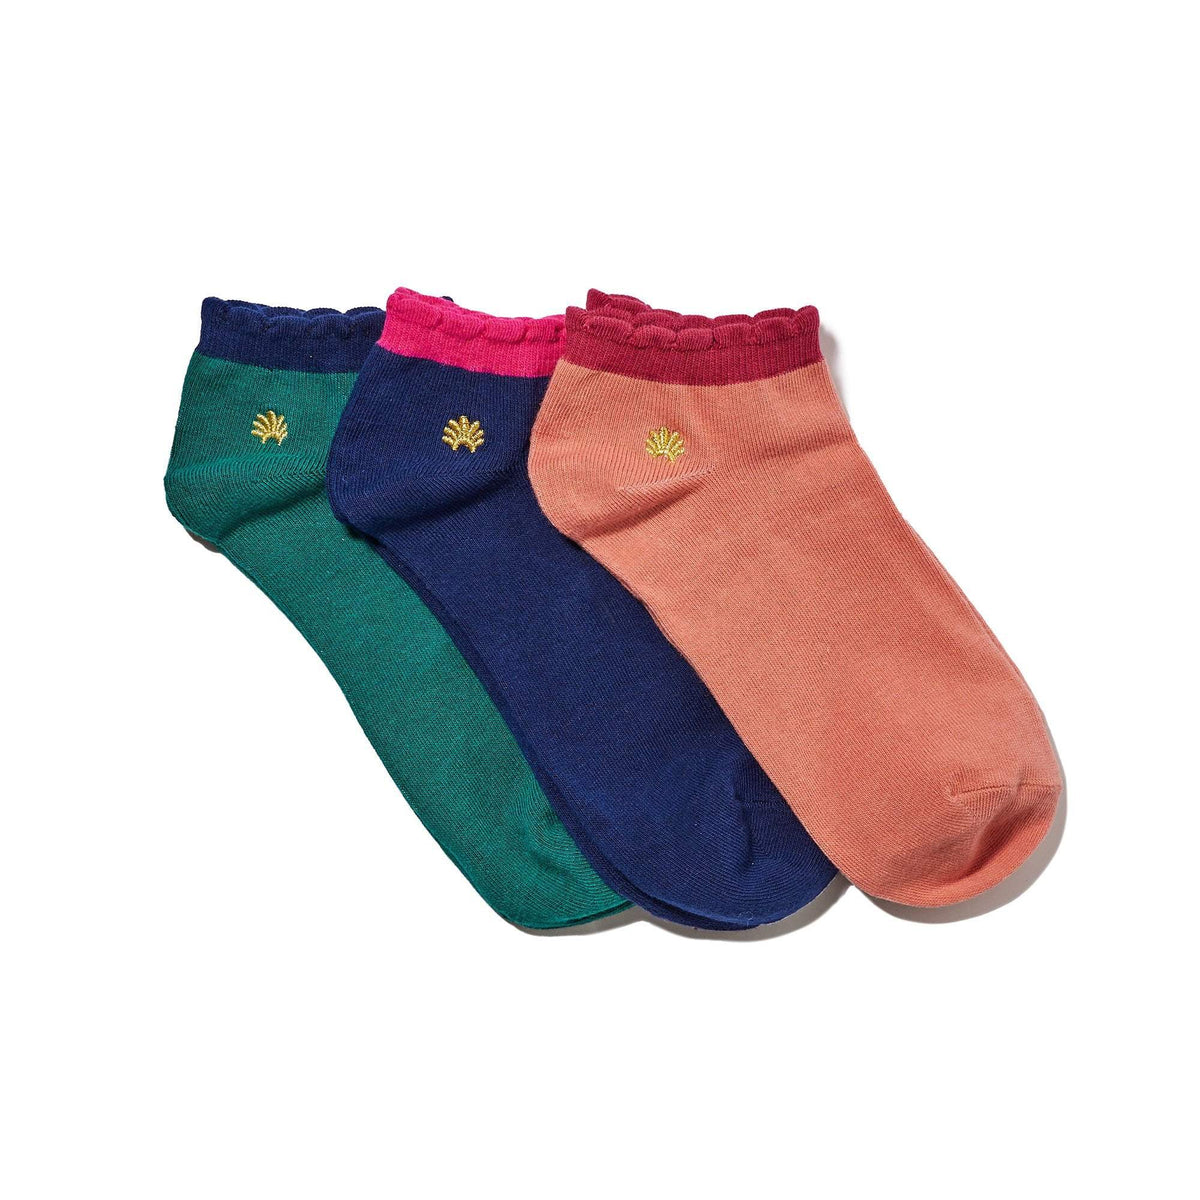 Lele Sadoughi HOSIERY ONE SIZE / MIDNIGHT FOREST MIDNIGHT FOREST SET OF 3 COUNTRY CLUB ANKLE SOCKS